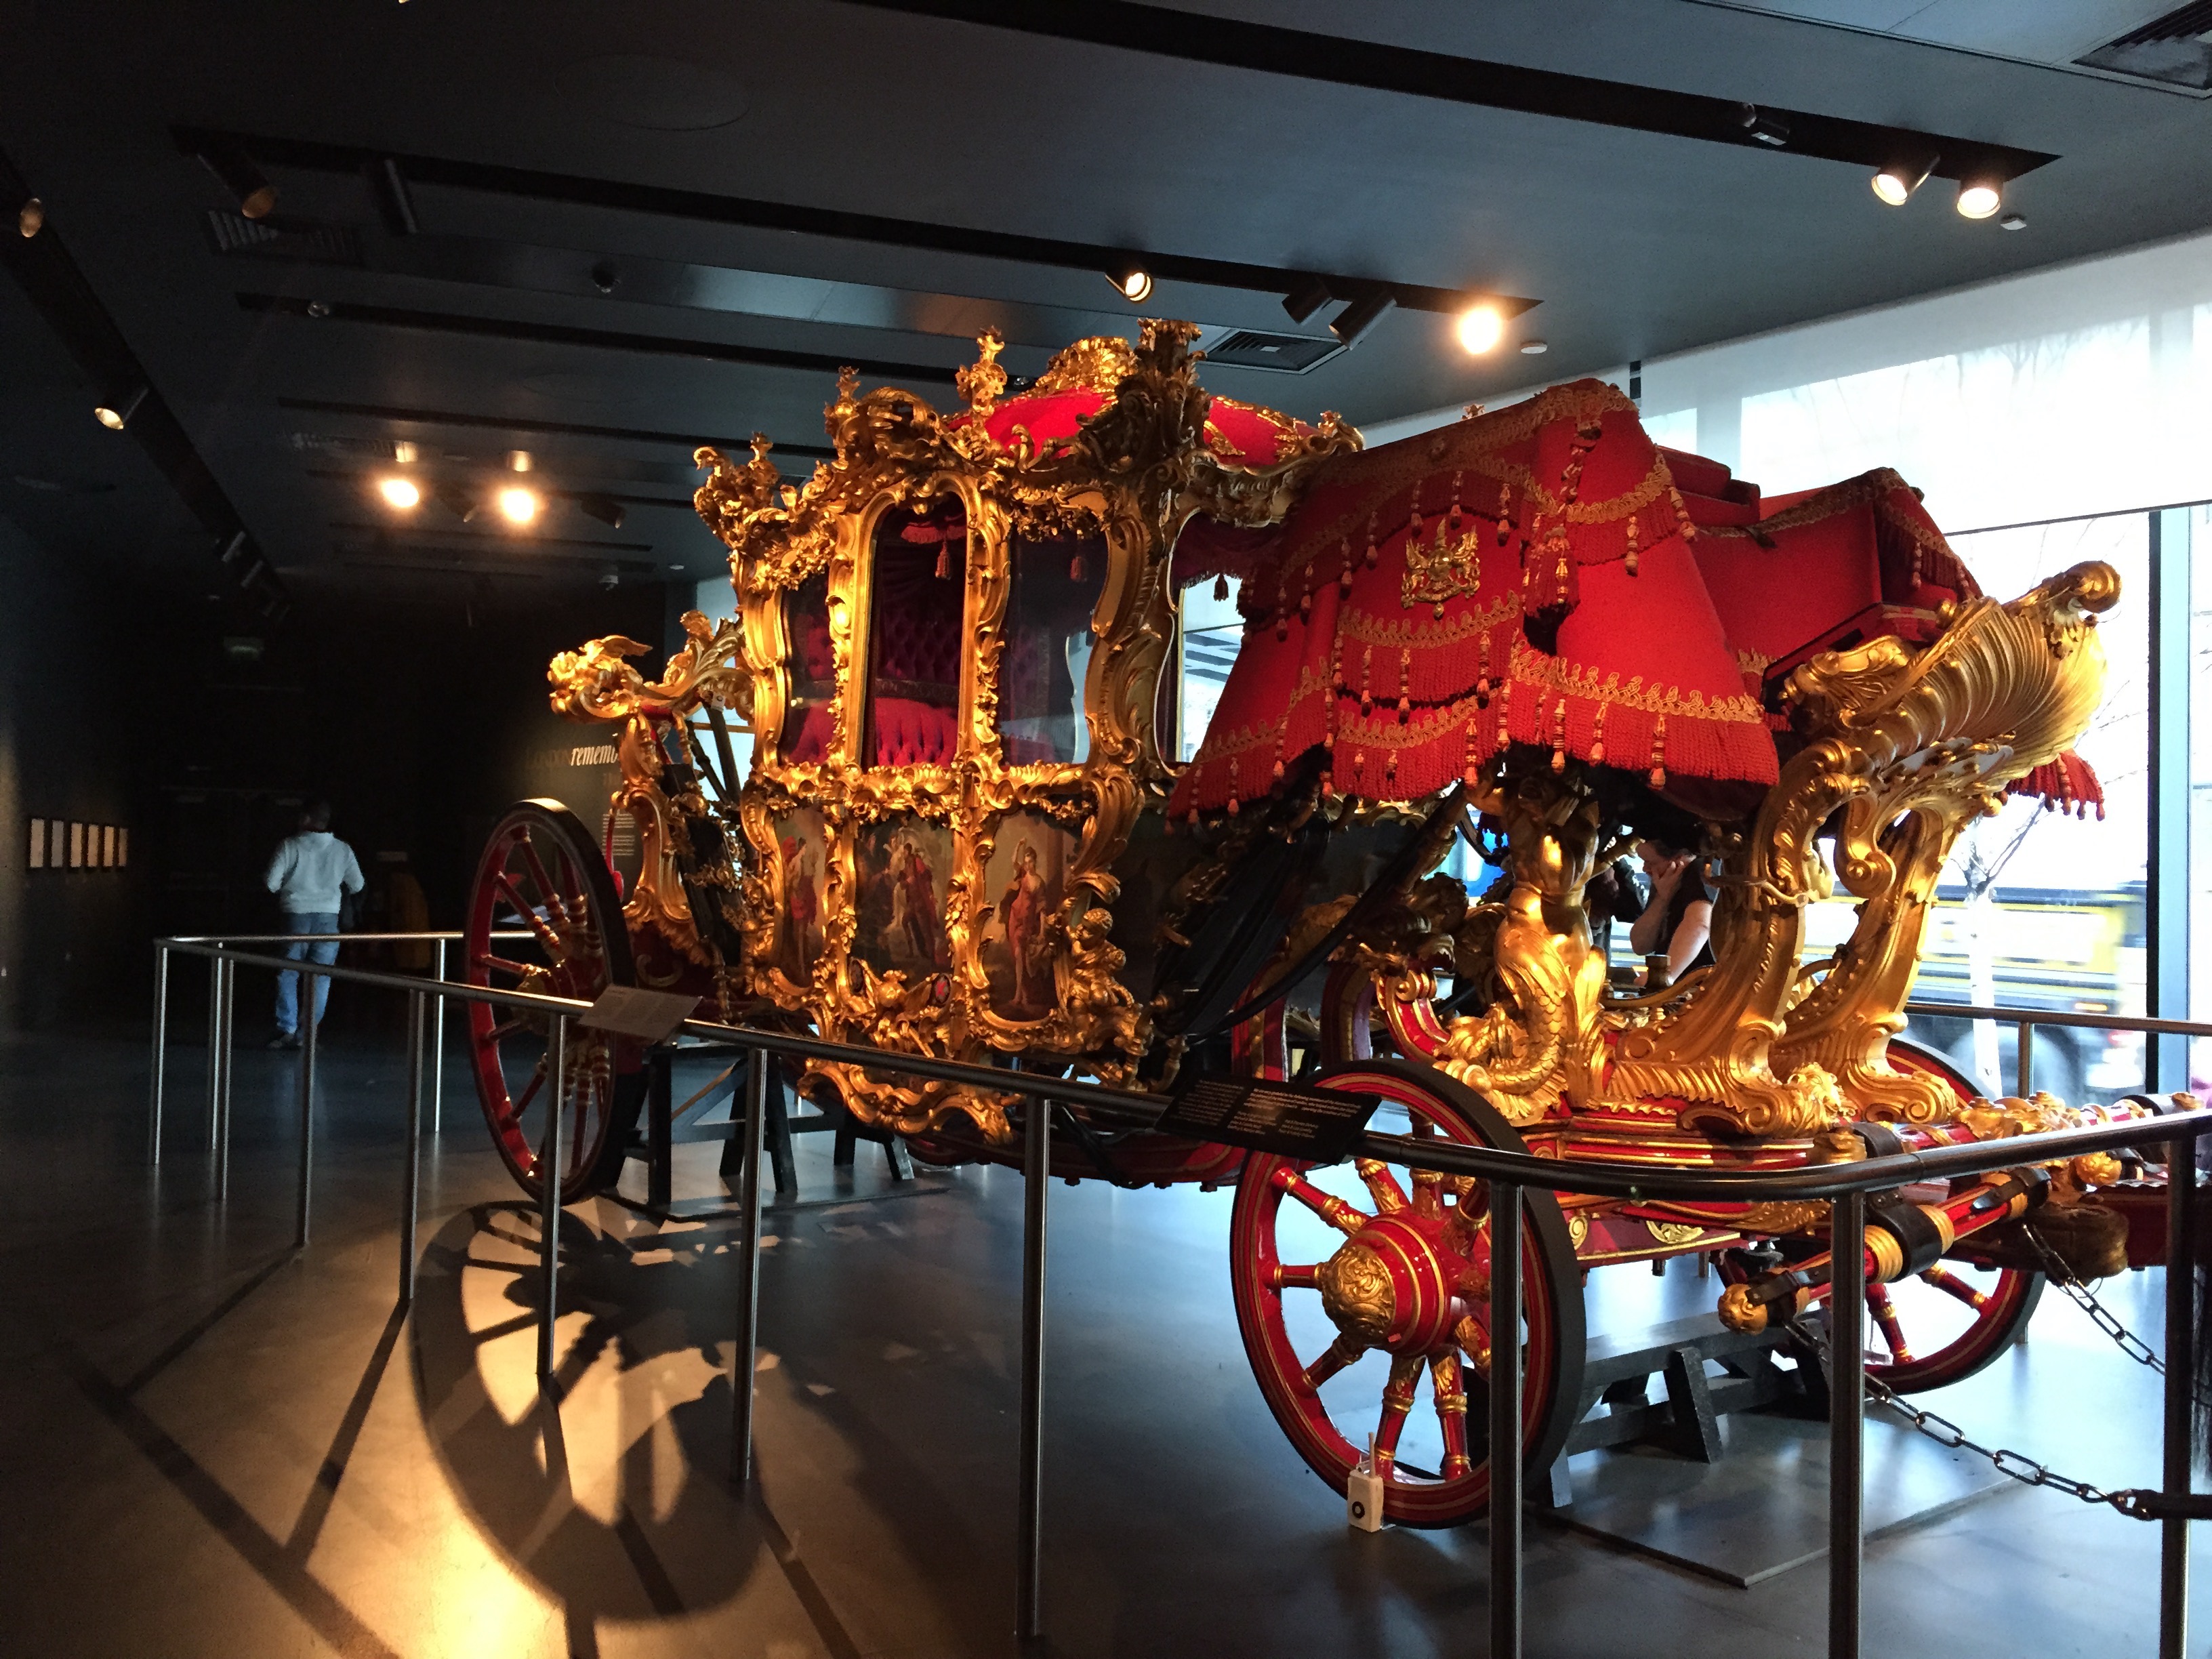 Lord Mayor's Coach, Museum of London